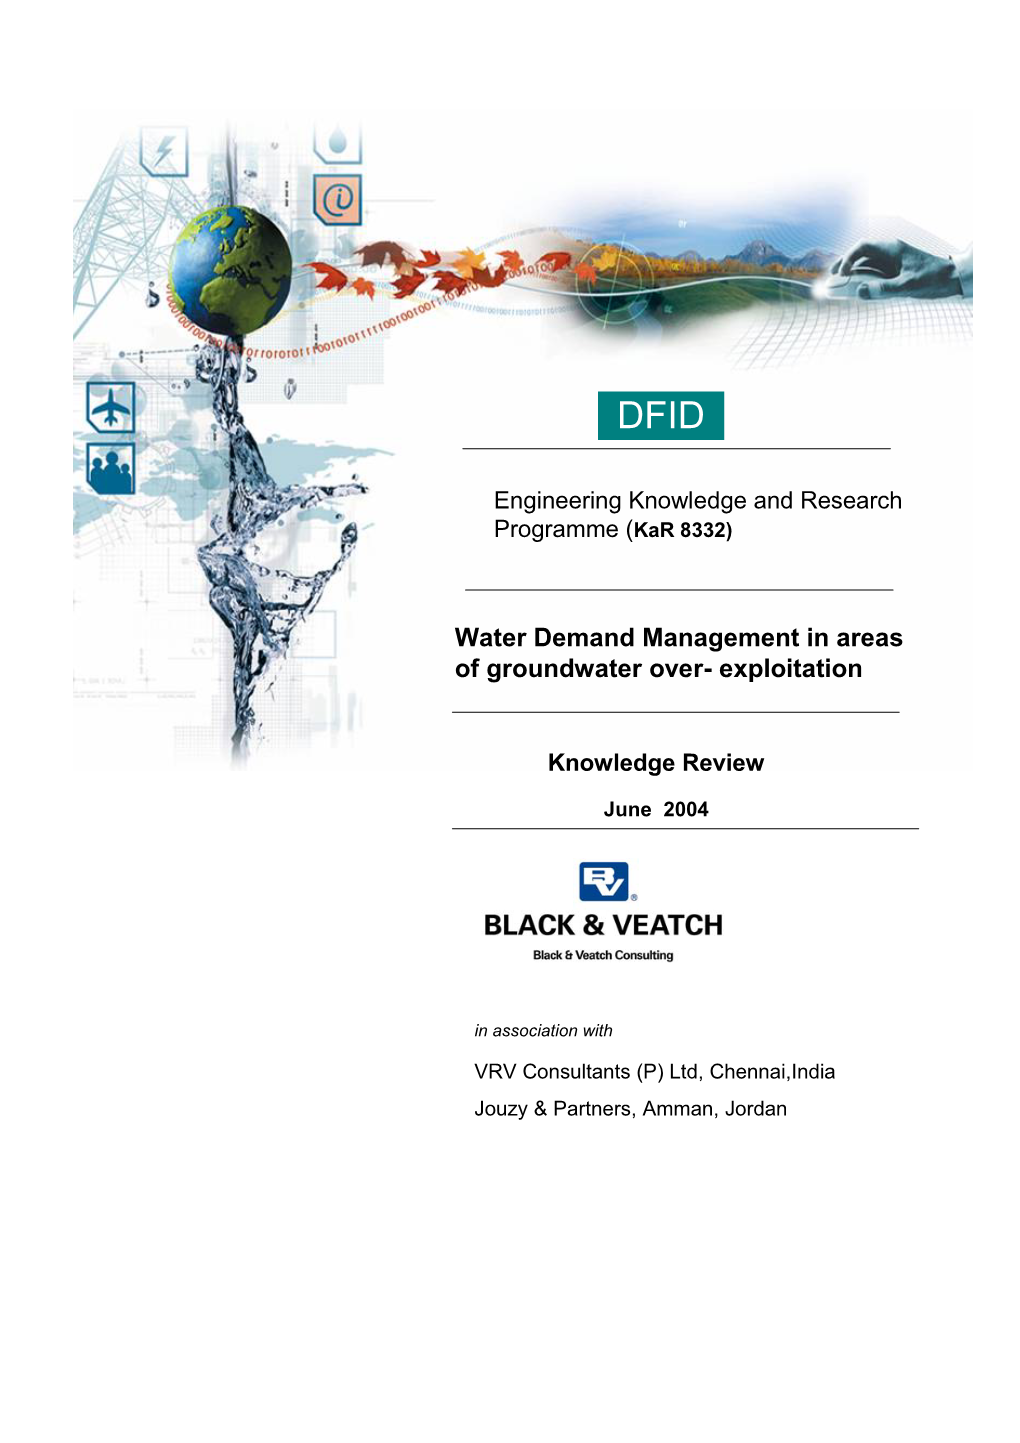 Water Demand Management in Areas of Groundwater Over- Exploitation